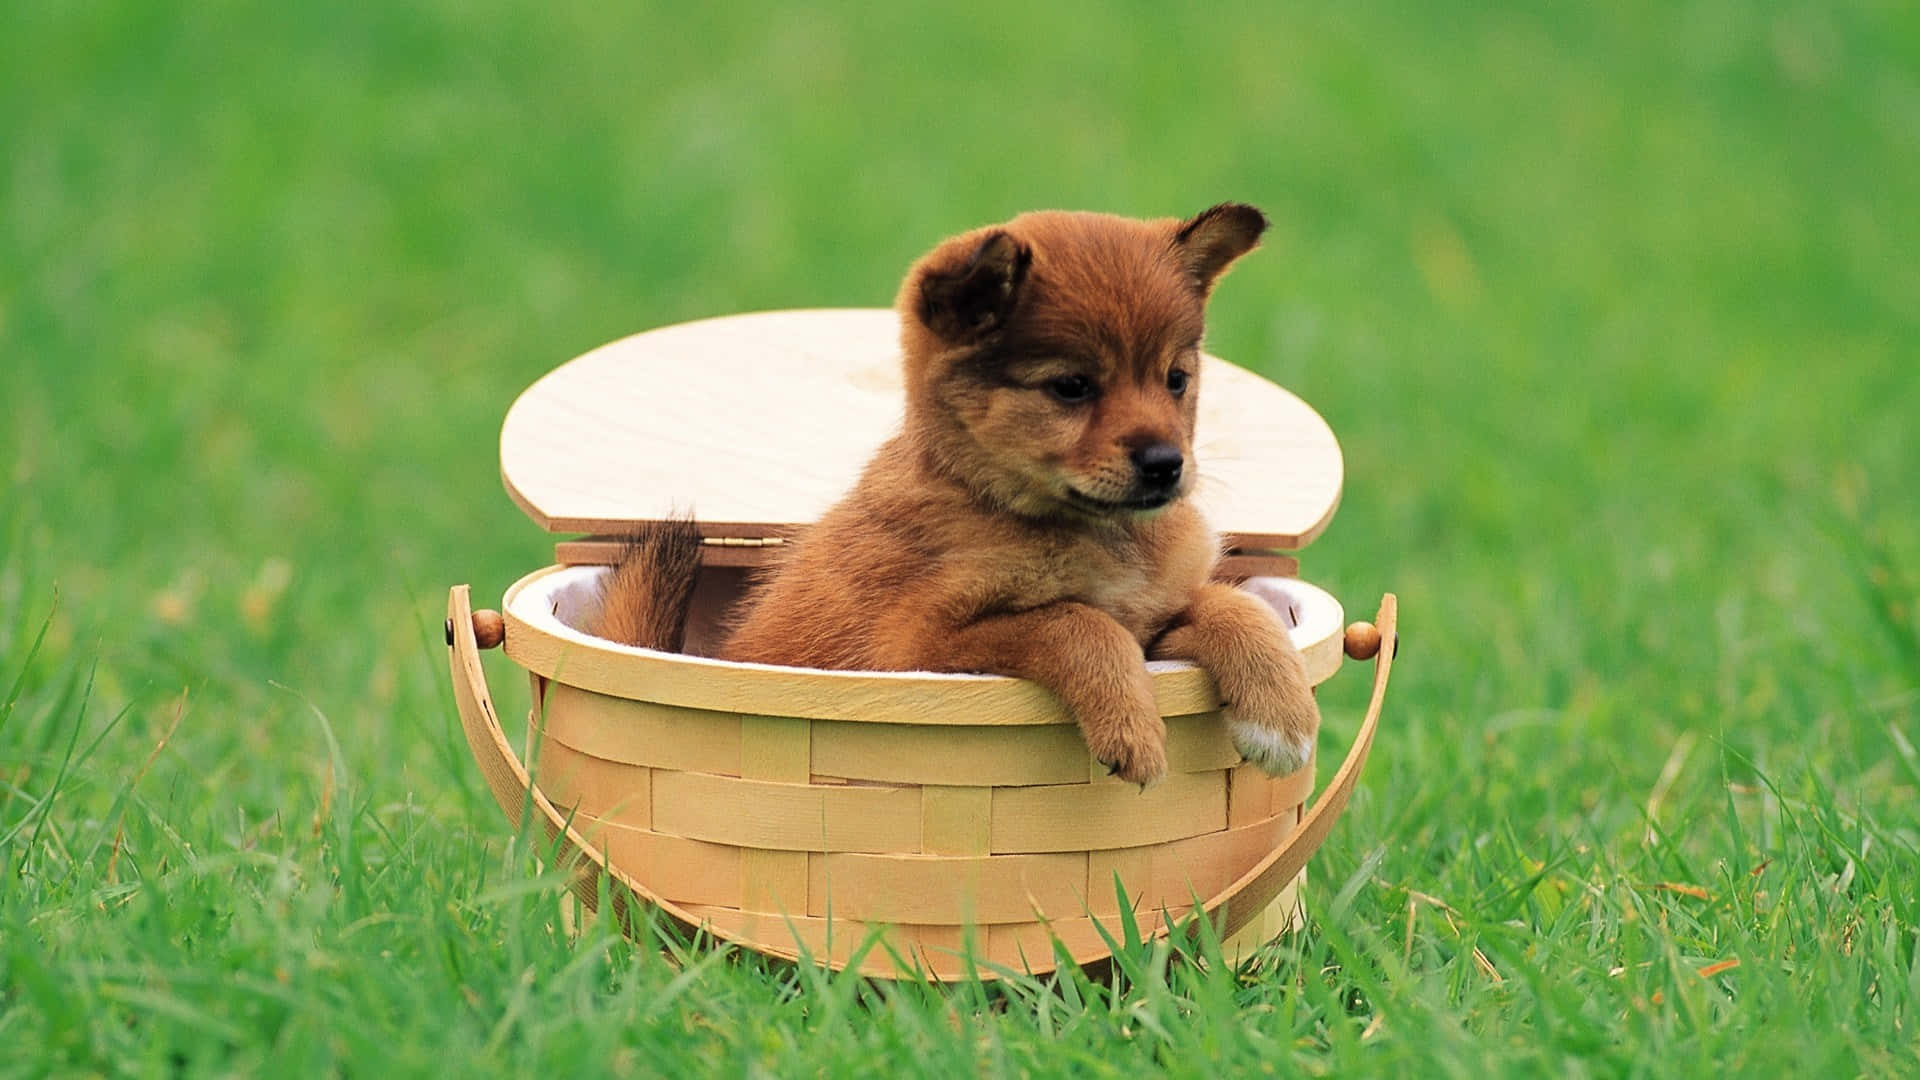 Cute Pets Puppy In Basket On Grass Picture